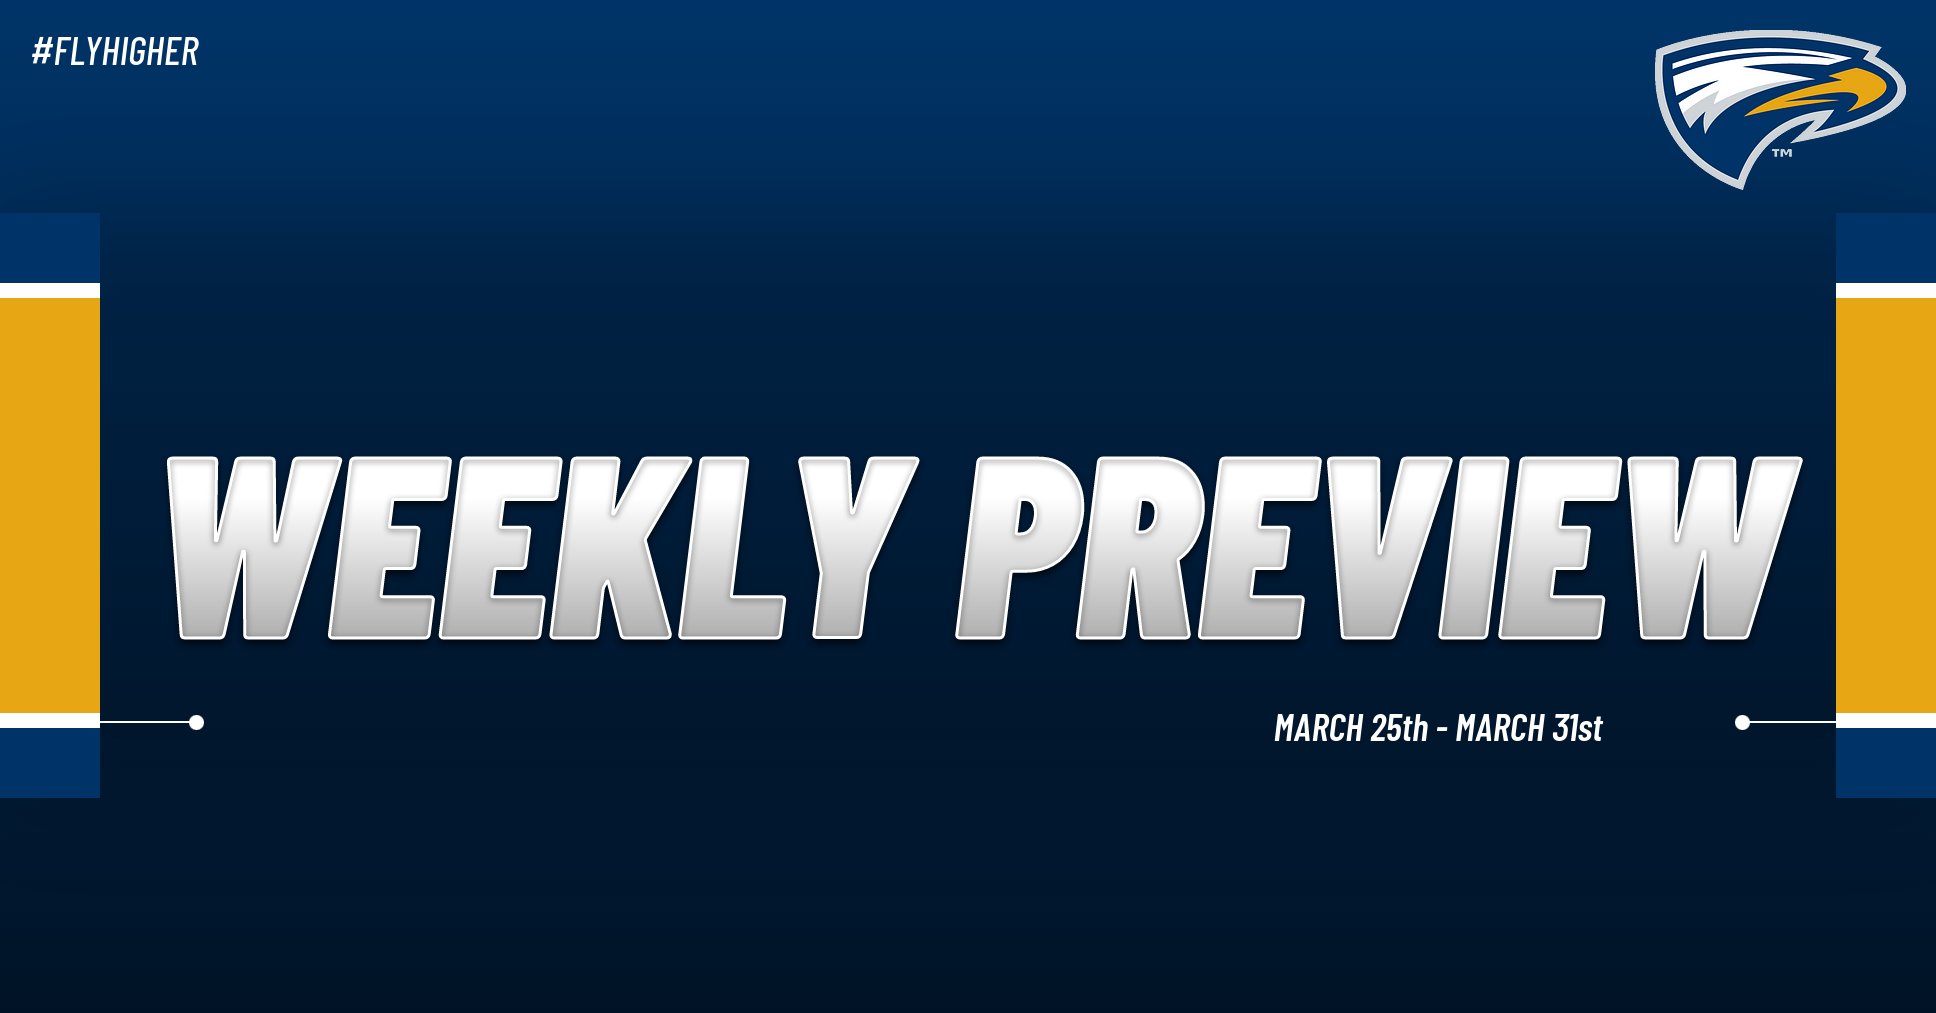 Emory Athletics Weekly Preview: March 25th - March 31st